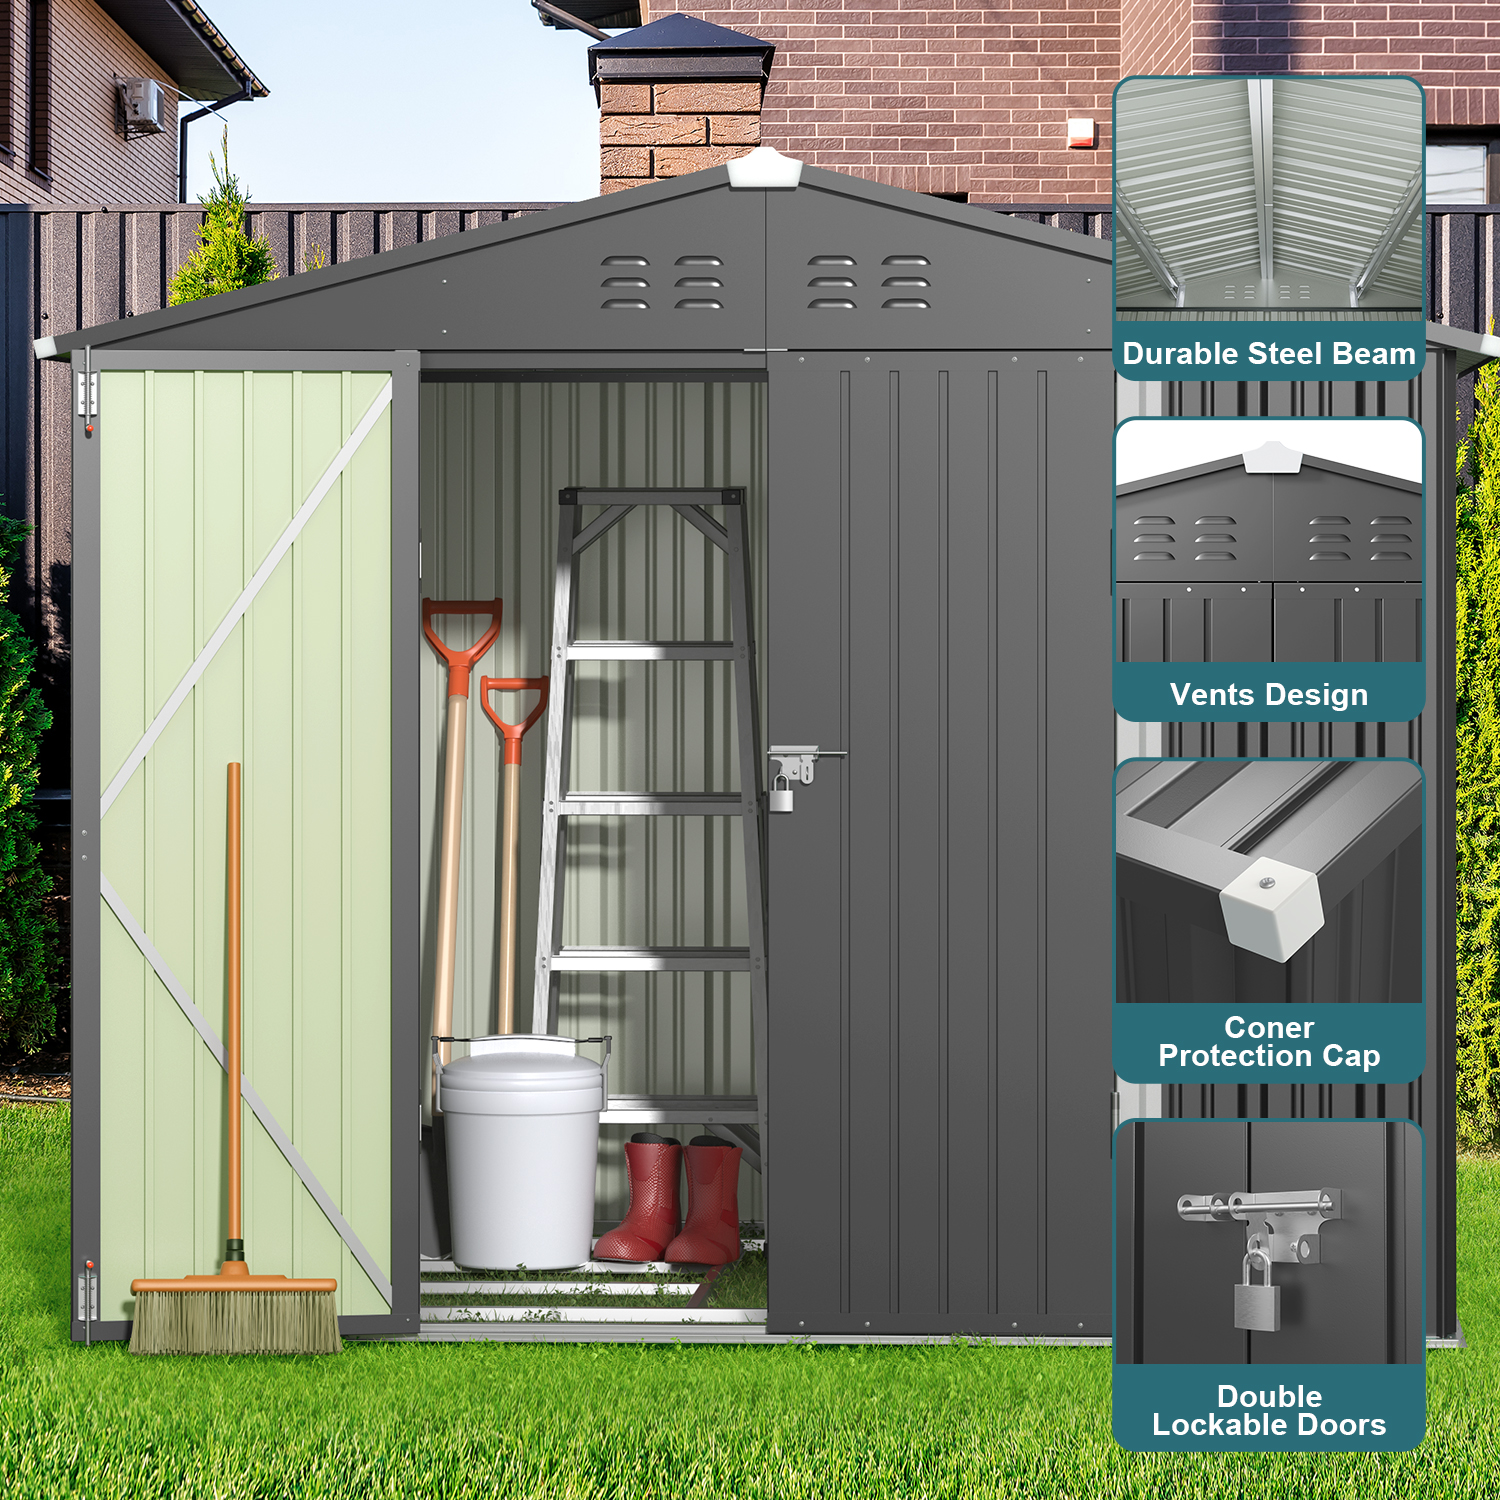 Lofka 8 x 6 FT Metal  Outdoor Storage Shed with Double Lockable Doors and Air Vents for Patio, Garden, Backyard, Lawn, Dark Gray - image 5 of 7